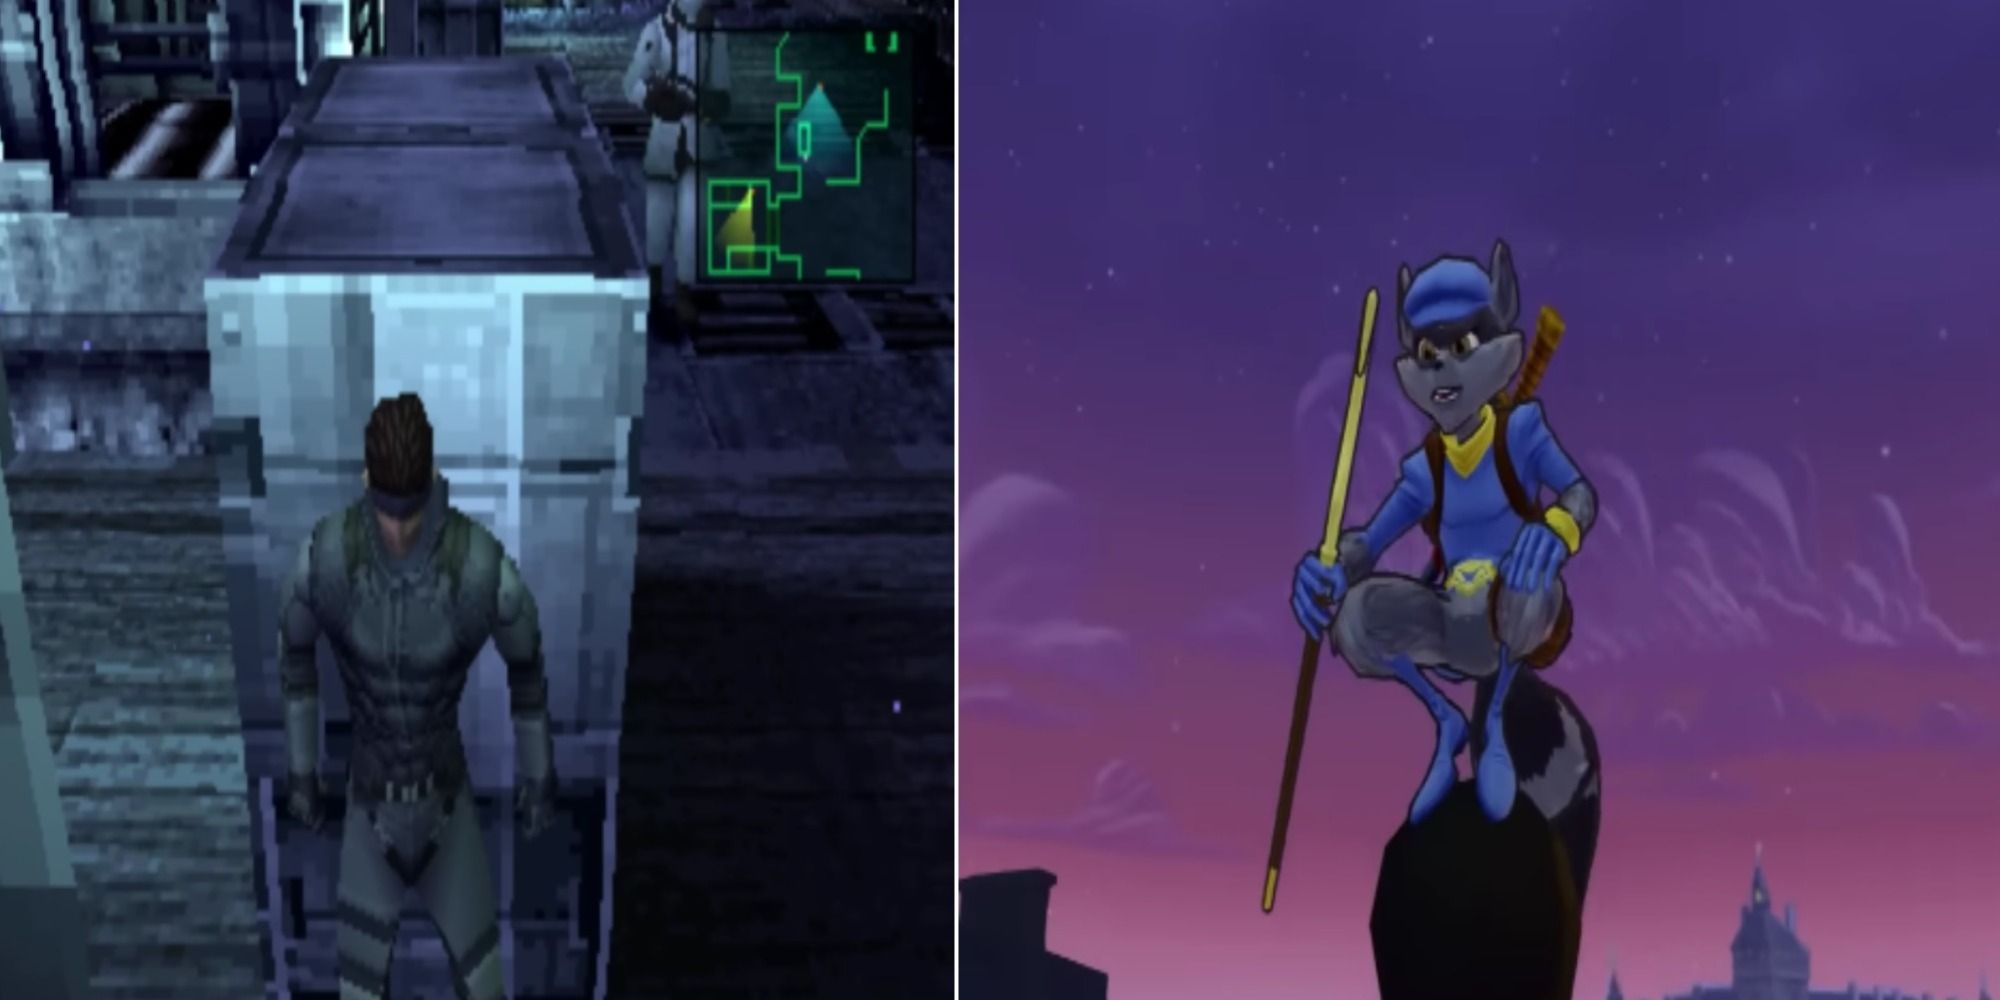 Split image Solid Snake hiding from guard and Sly Cooper on top of building